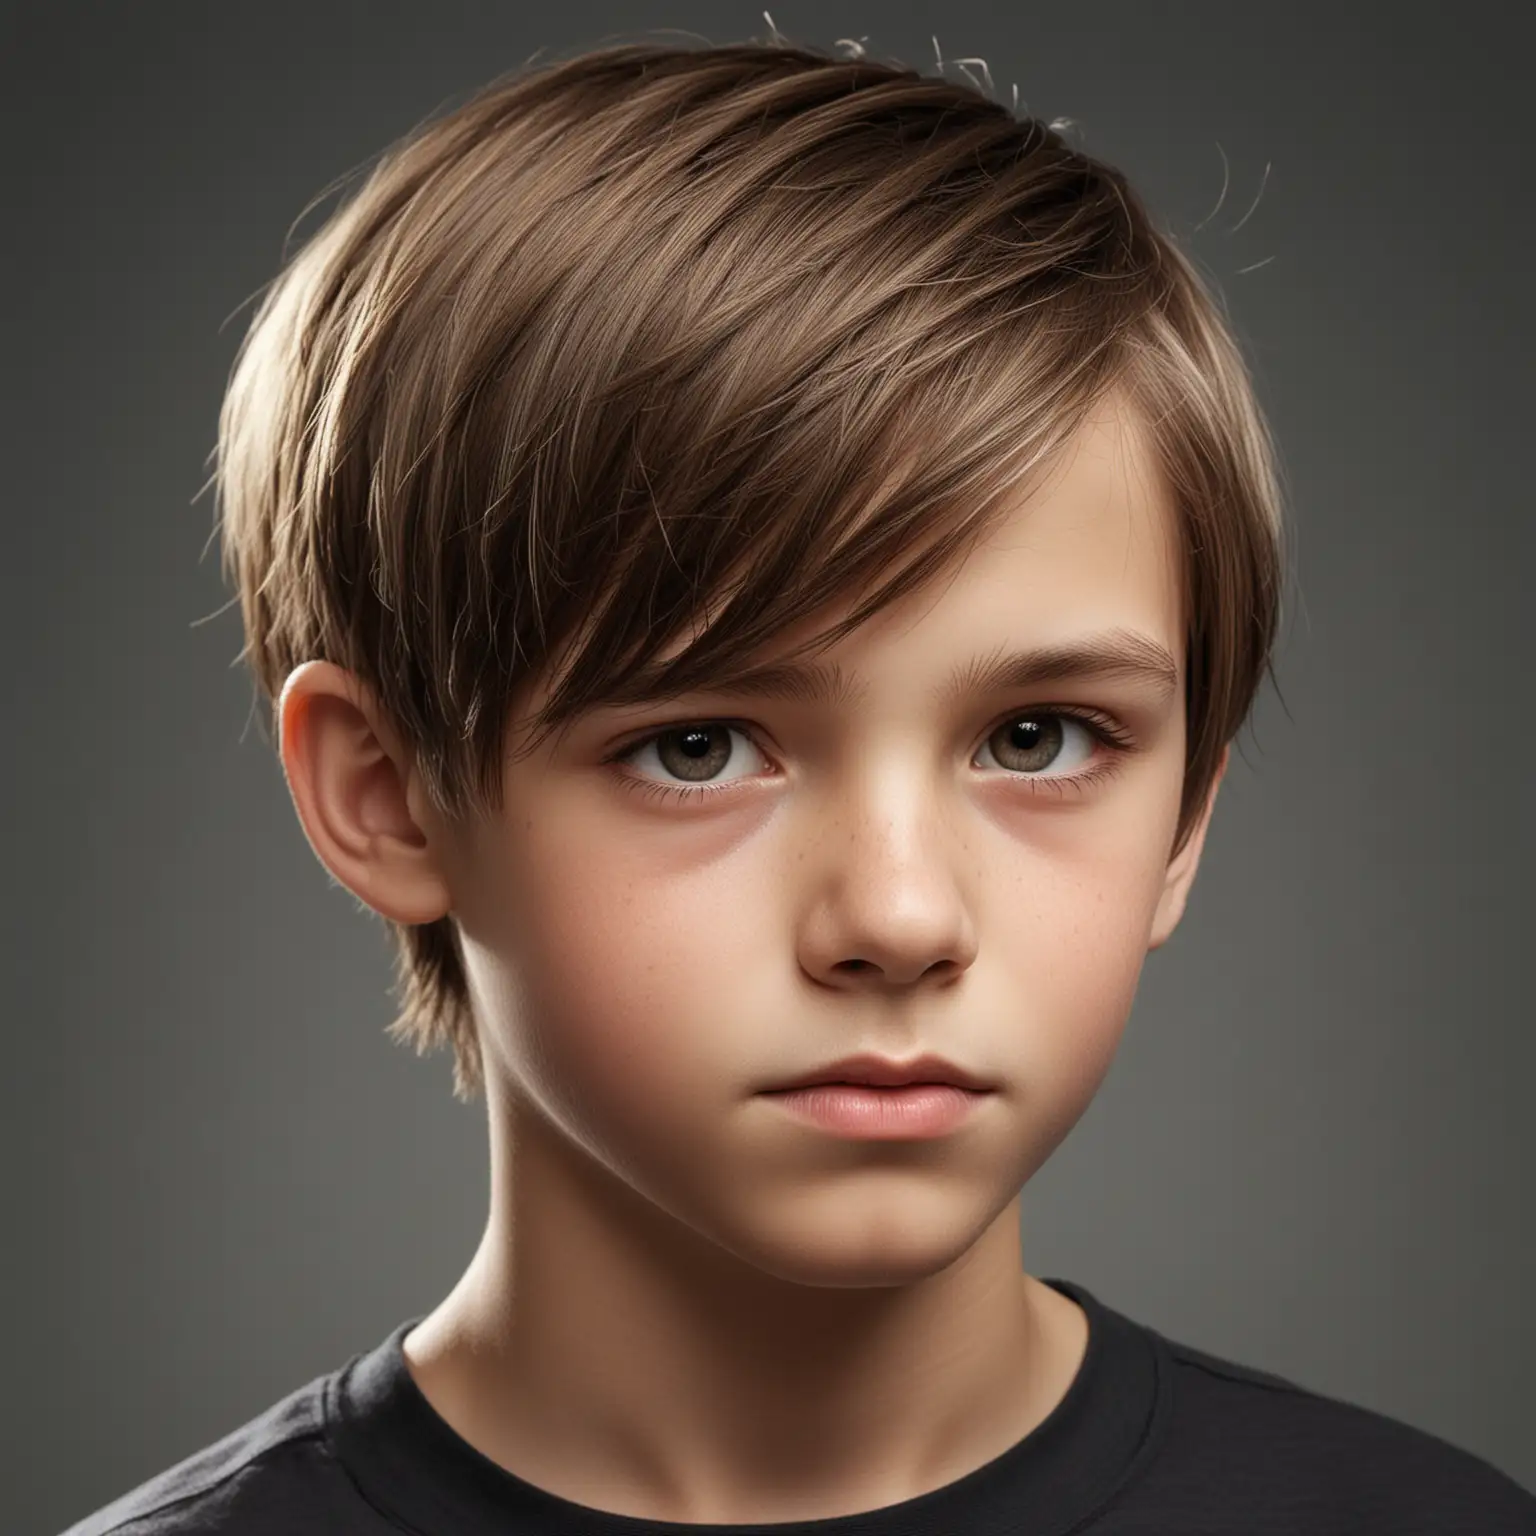 Portrait of a ThirteenYearOld Boy with Smooth and Shiny Hair Profile View